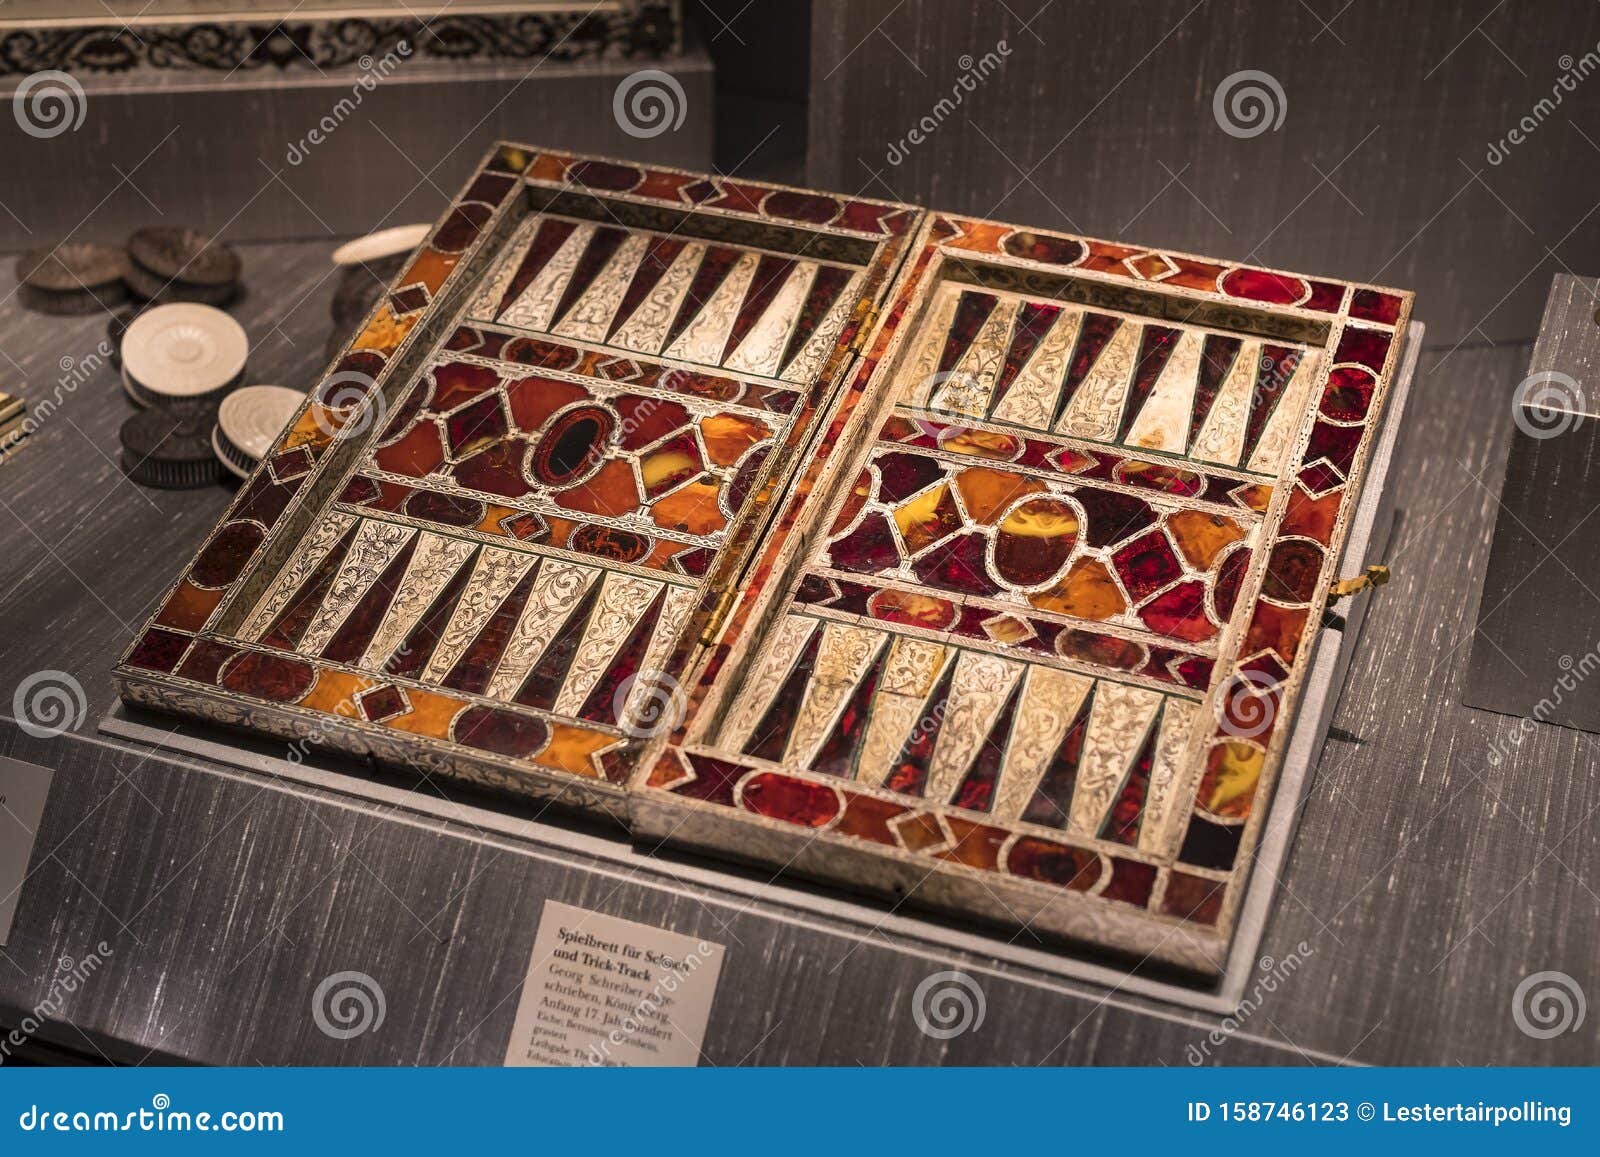 The Represents An Exposition Of The History Of The Development Of Board Games Chess Backgammon Poker In The Bavarian National Muse Editorial Stock Photo Image Of Backgammon Characters 158746123